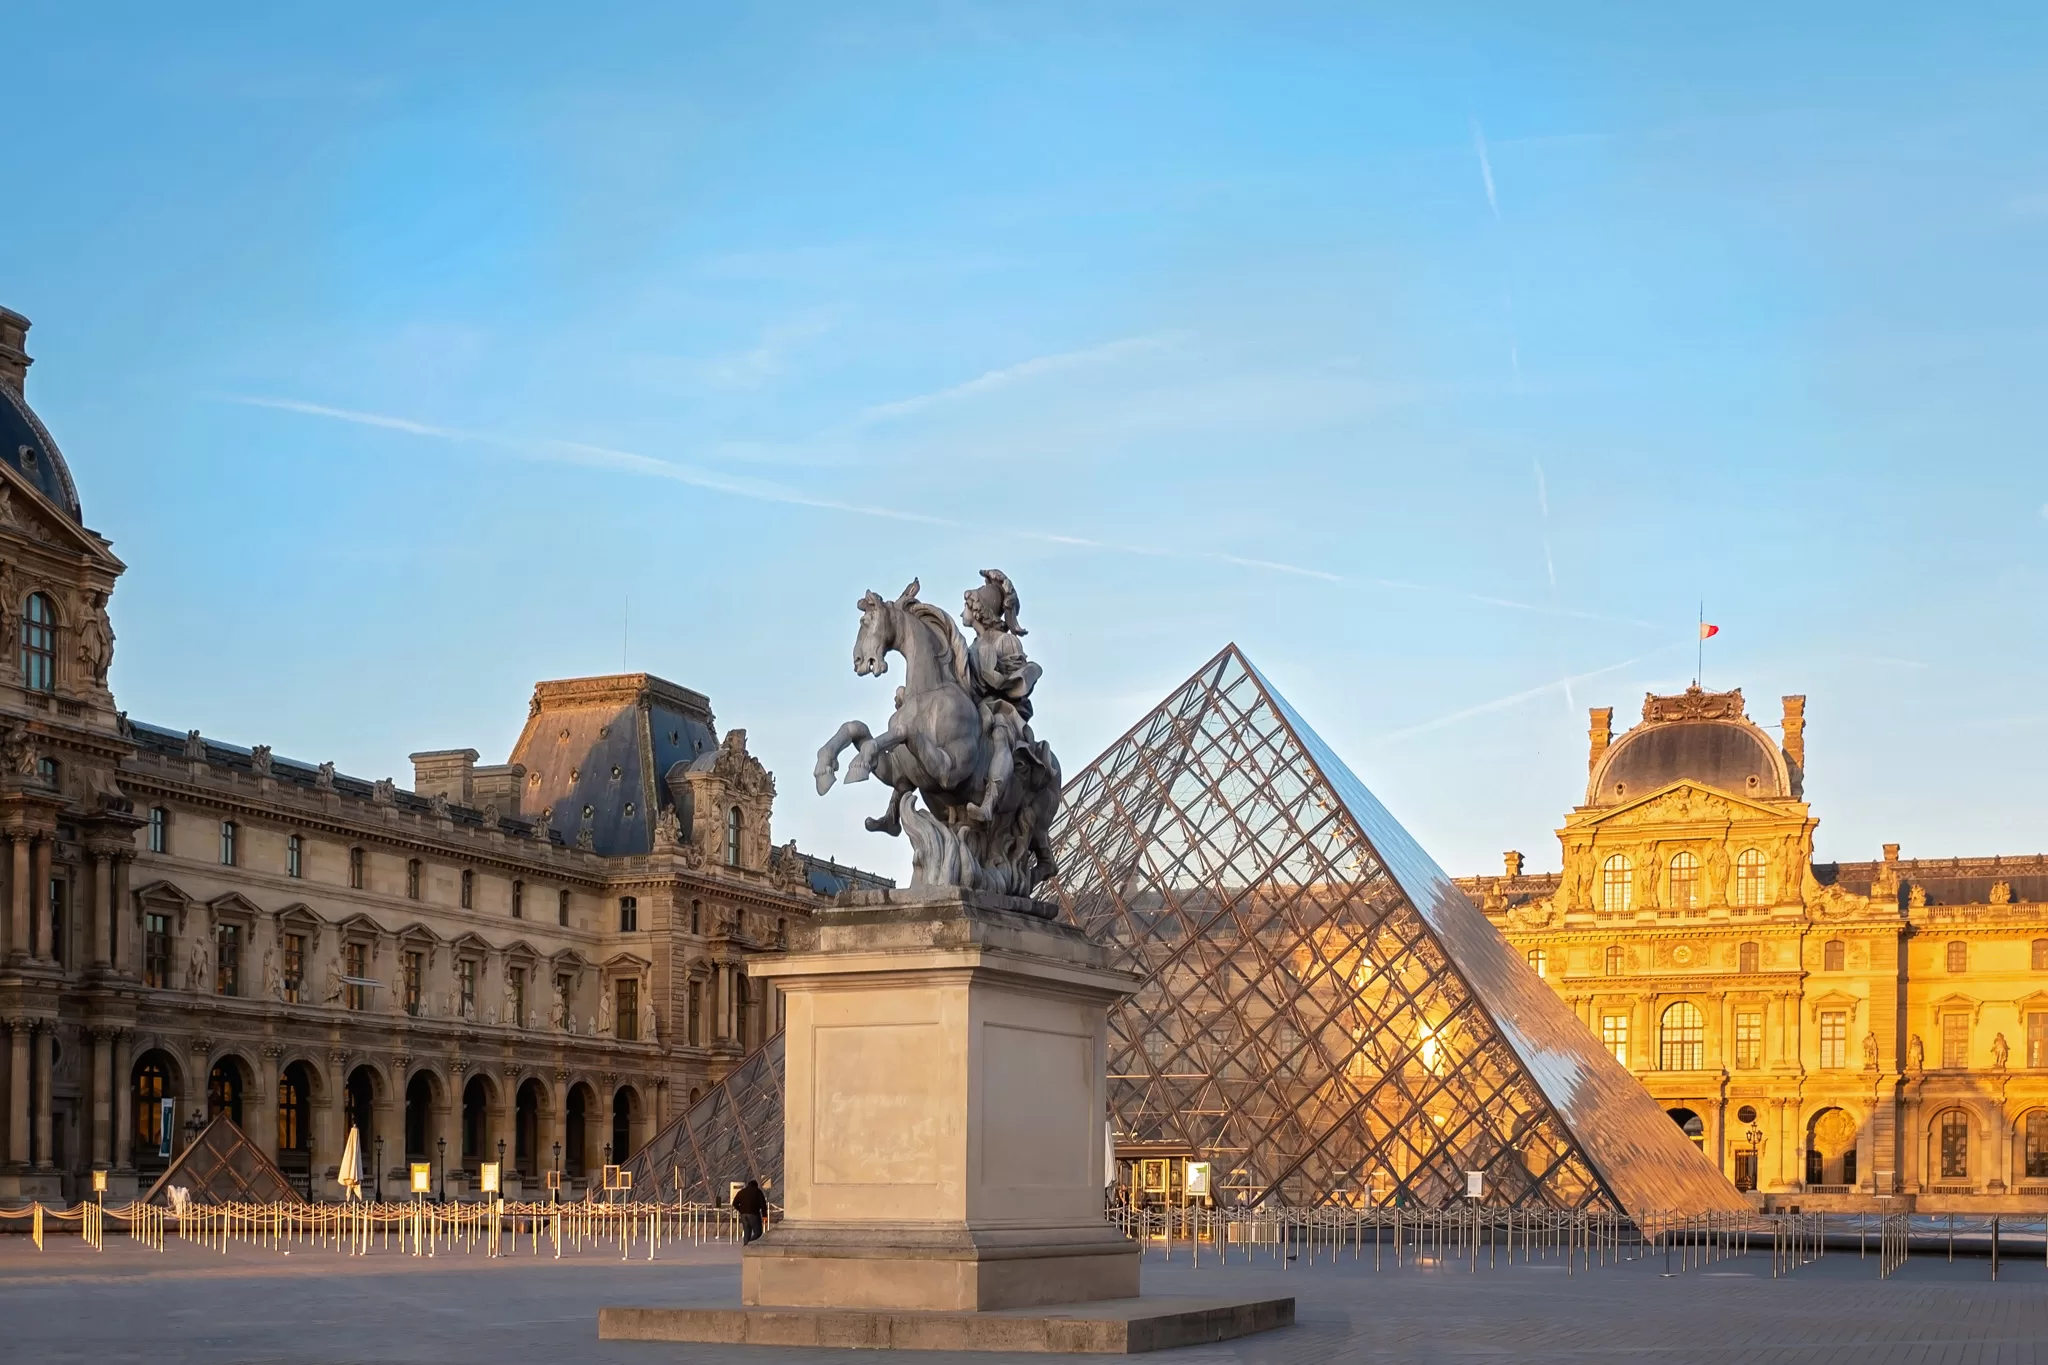 5 Louvre Artworks You Missed in the Mona Lisa Room - Context Travel